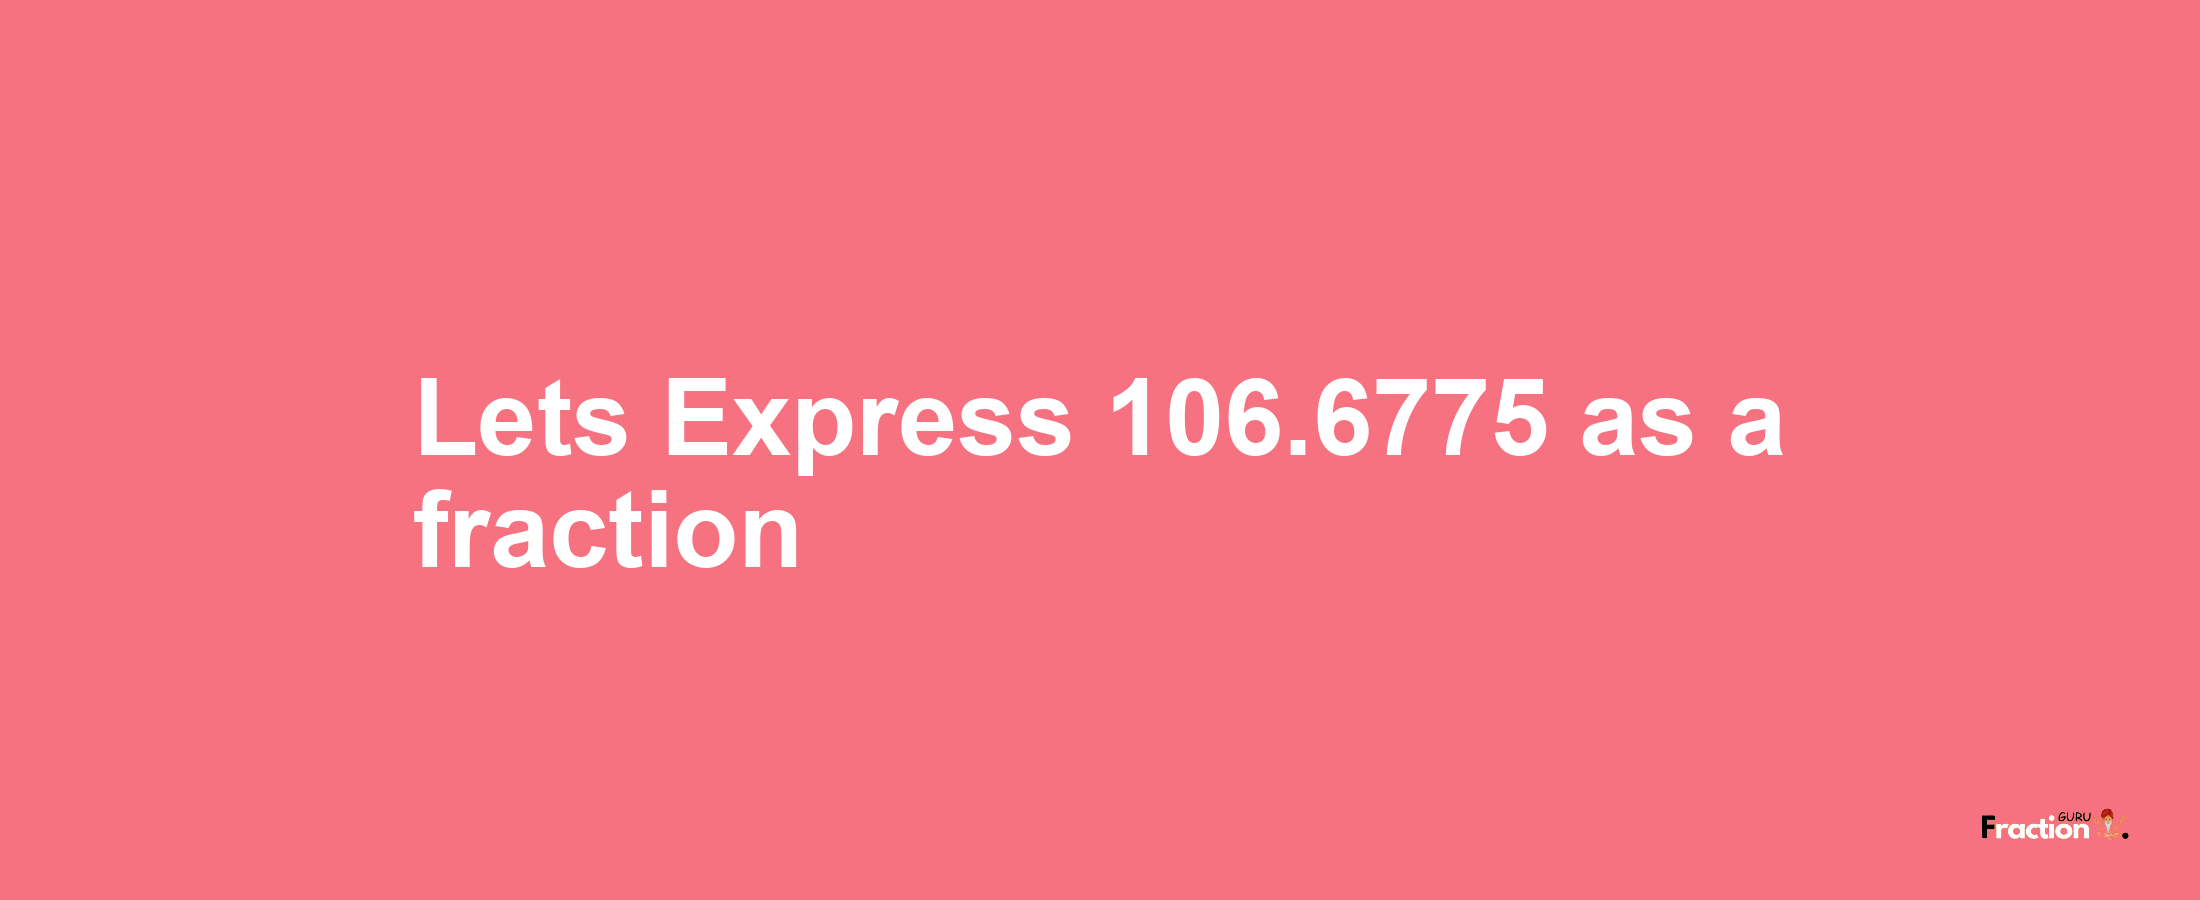 Lets Express 106.6775 as afraction